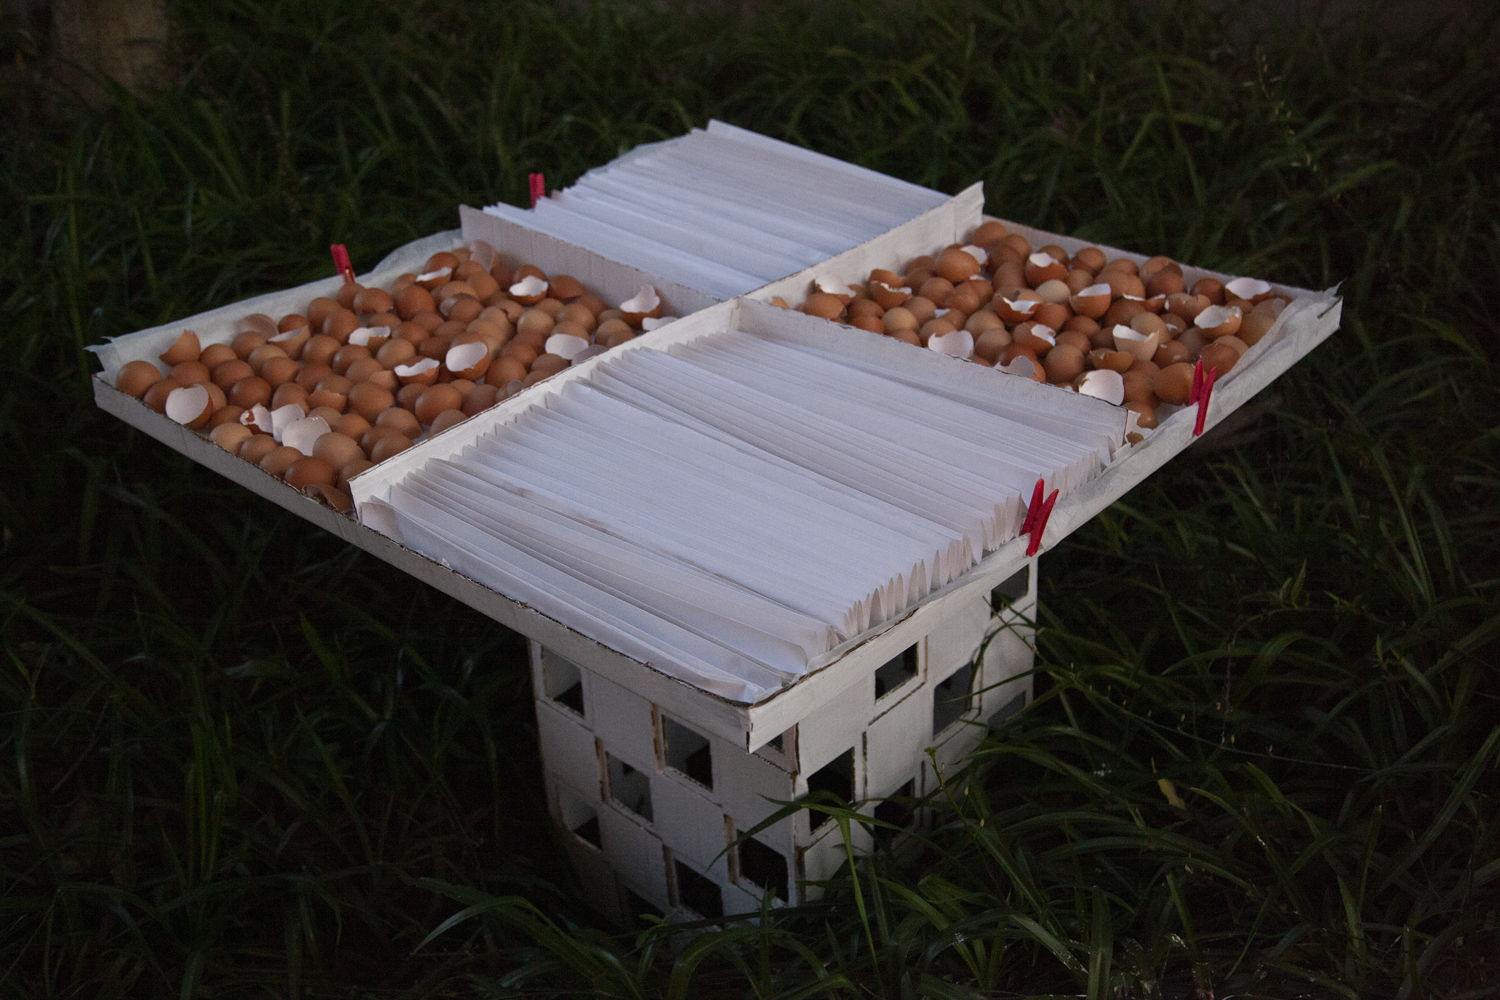 Painted white cardboard monument holding extended flat tray. Tray lined with baking paper and contains eggshells and accordian-folded paper across four alternating square sections.